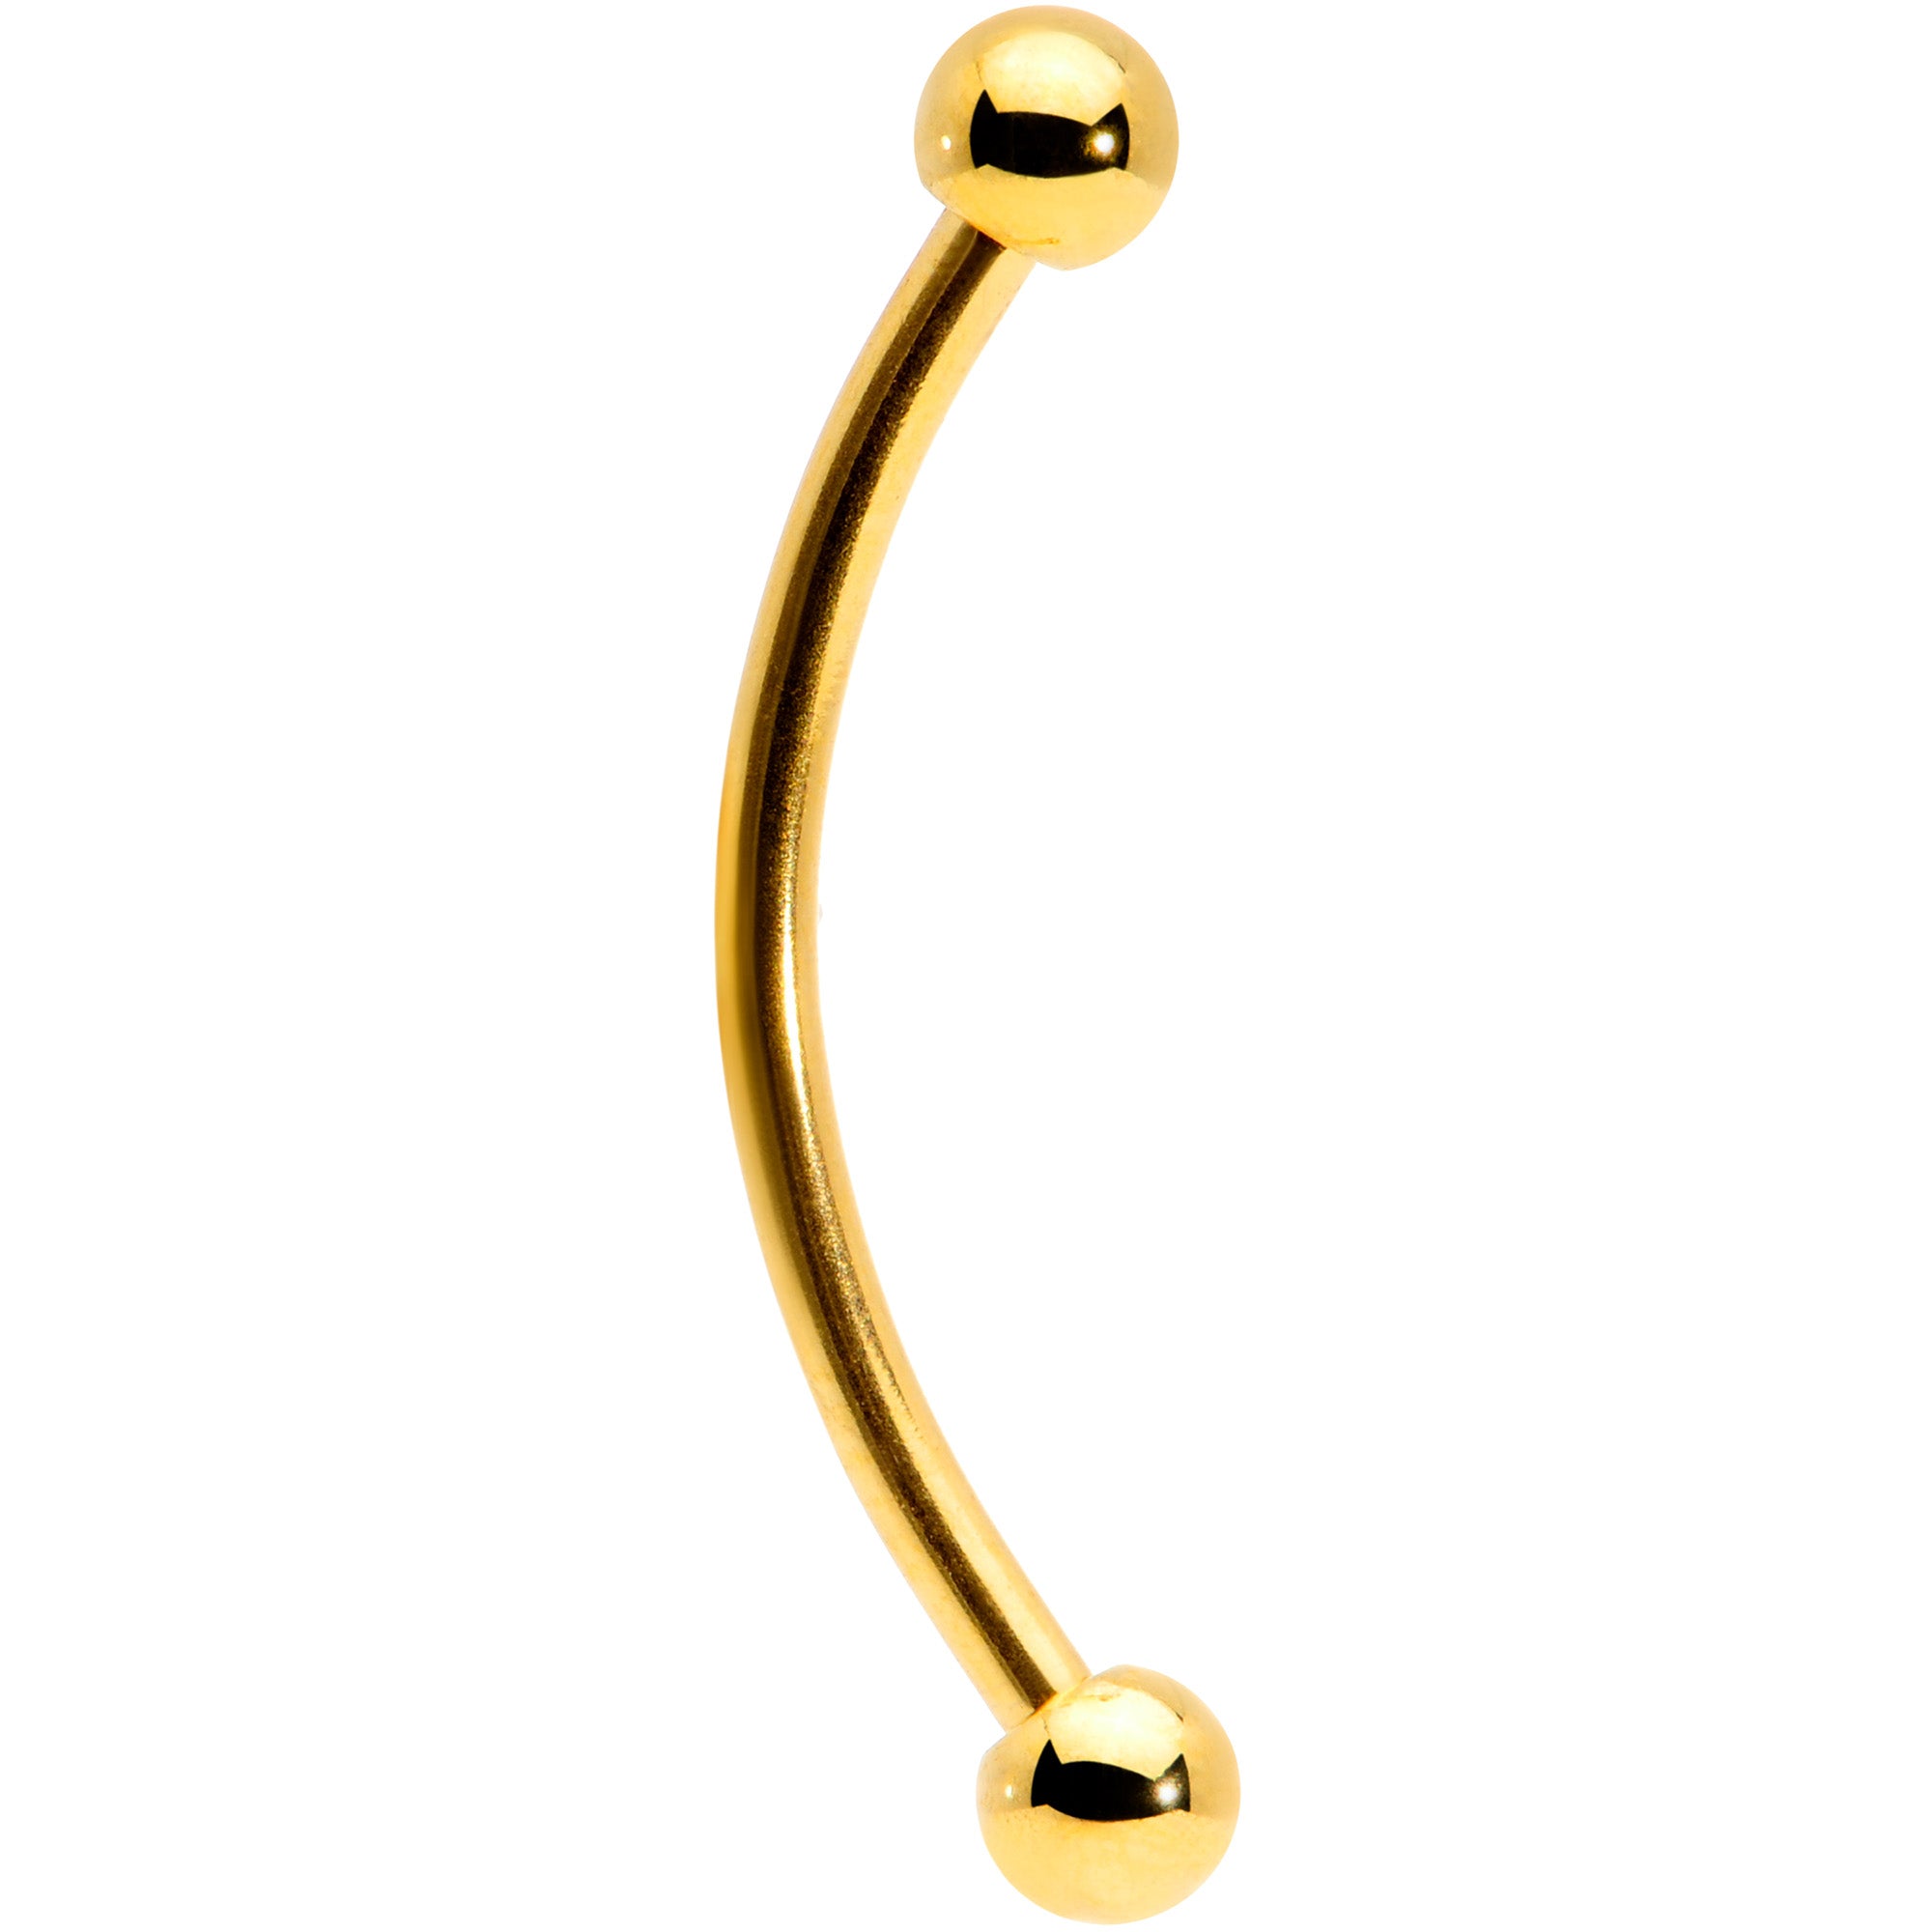 16 Gauge 5/8 Gold Tone Curved Barbell